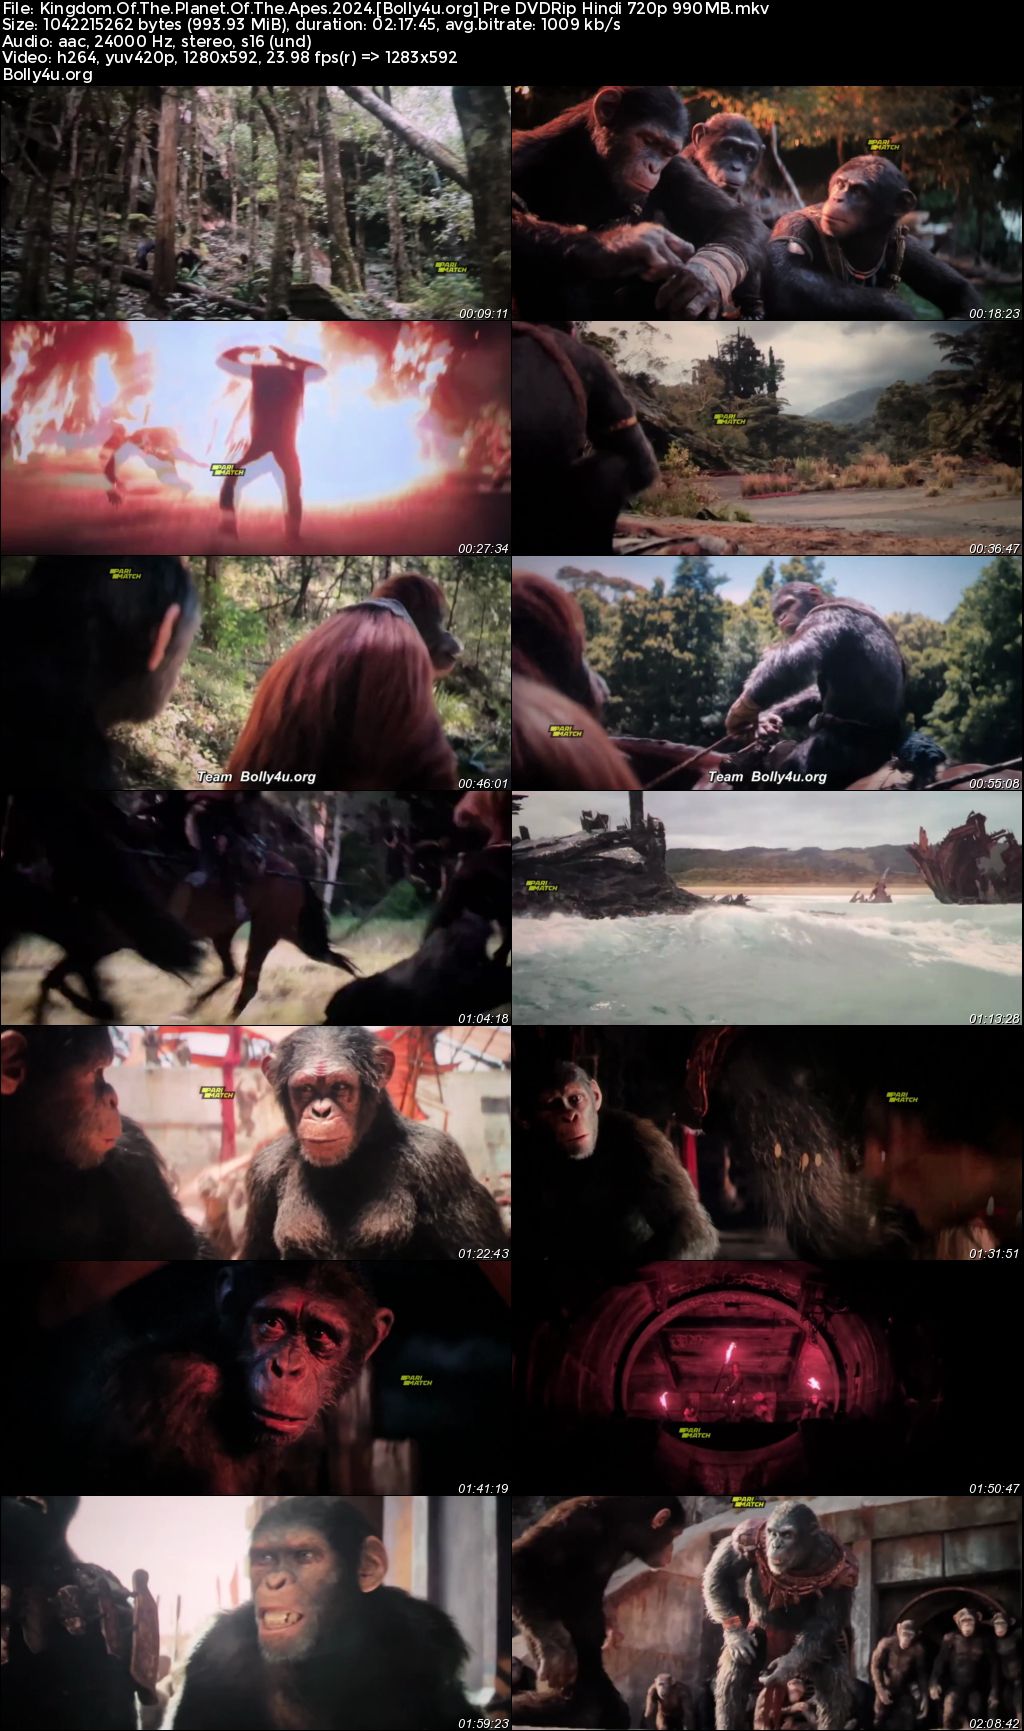 Kingdom of The Planet of The Apes 2024 Pre DVDRip Hindi Dubbed Full Movie Download 1080p 720p 480p